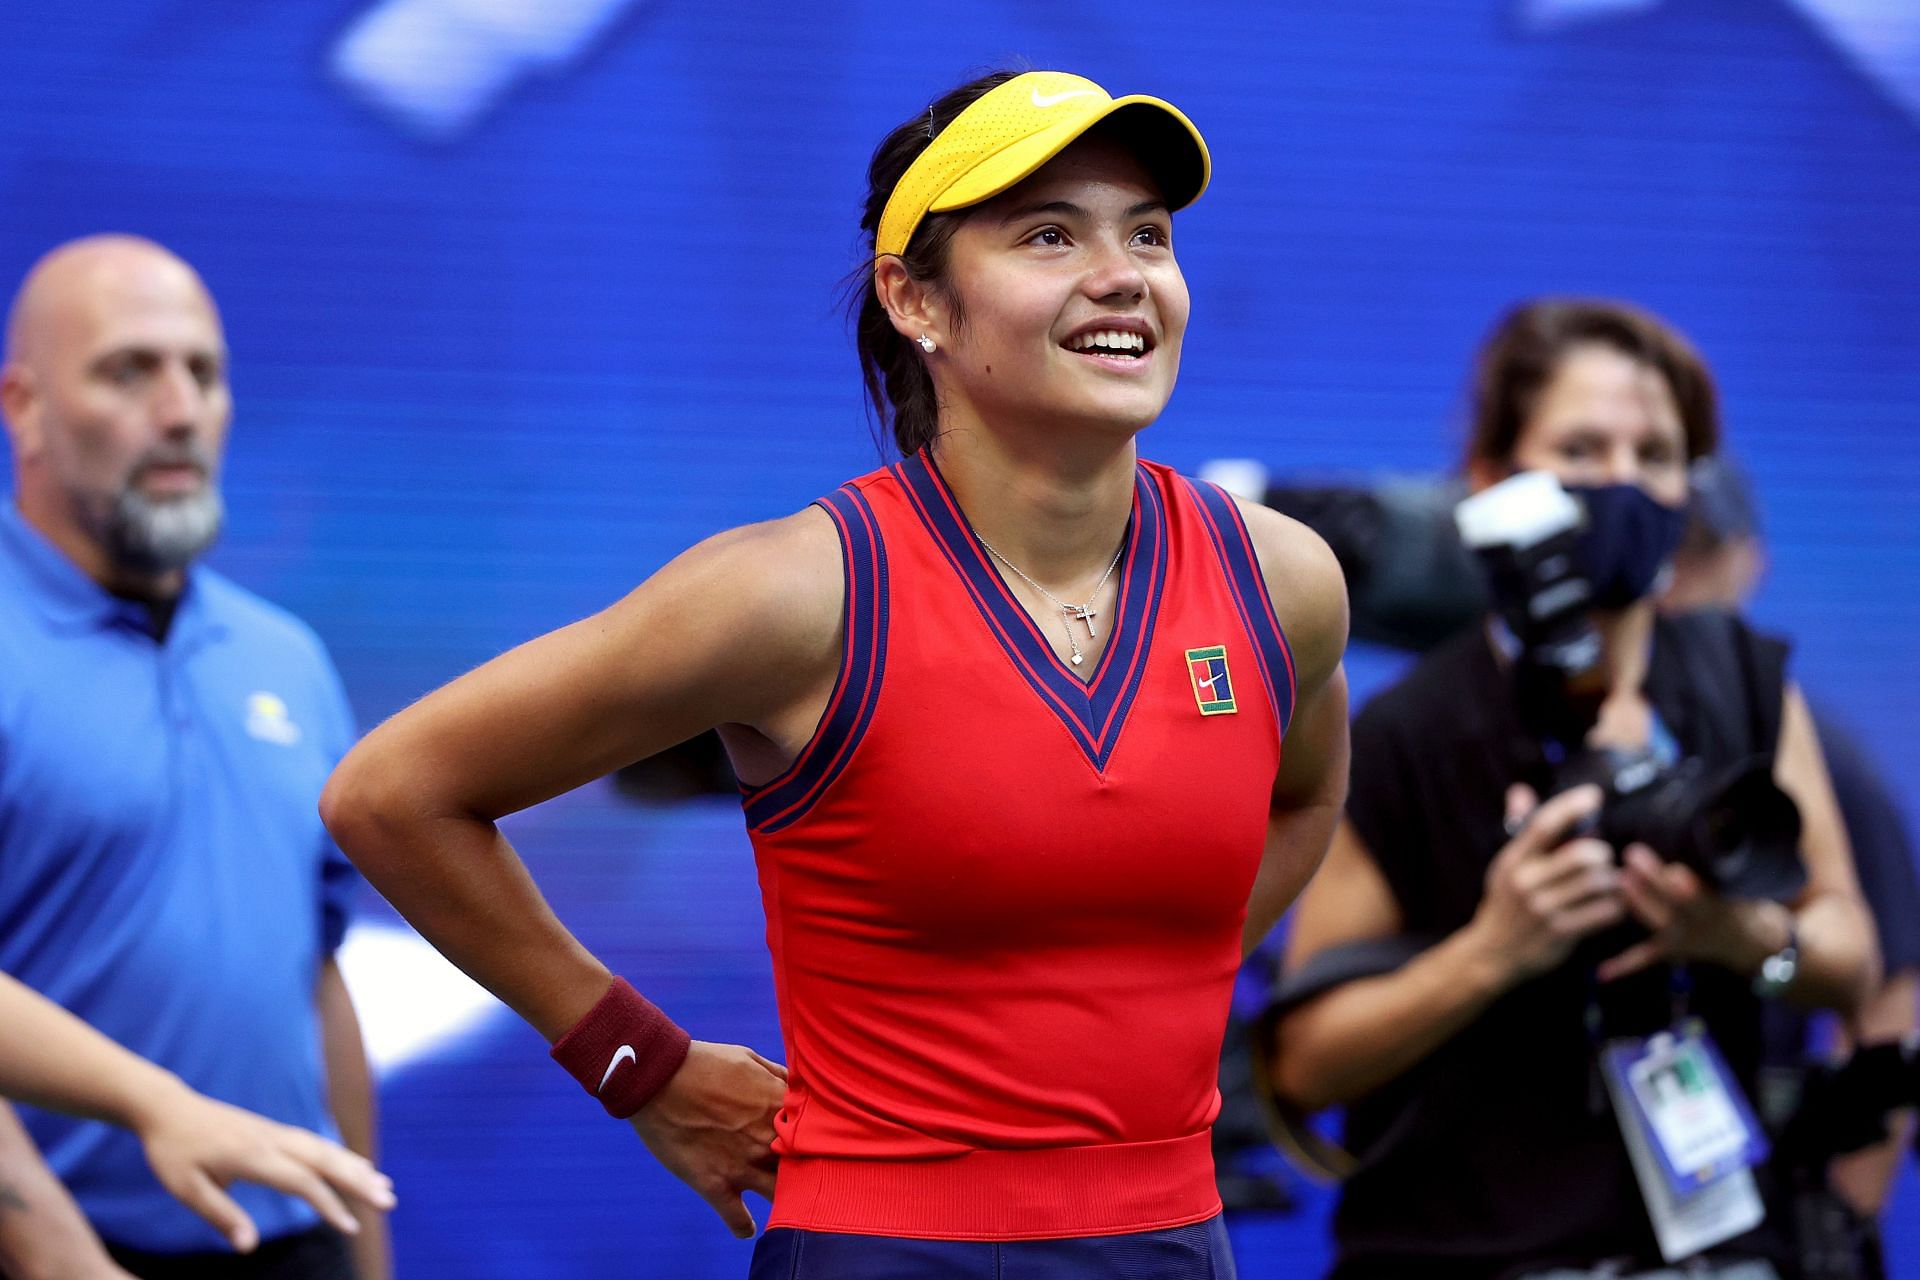 Raducanu after her title win at the 2021 US Open